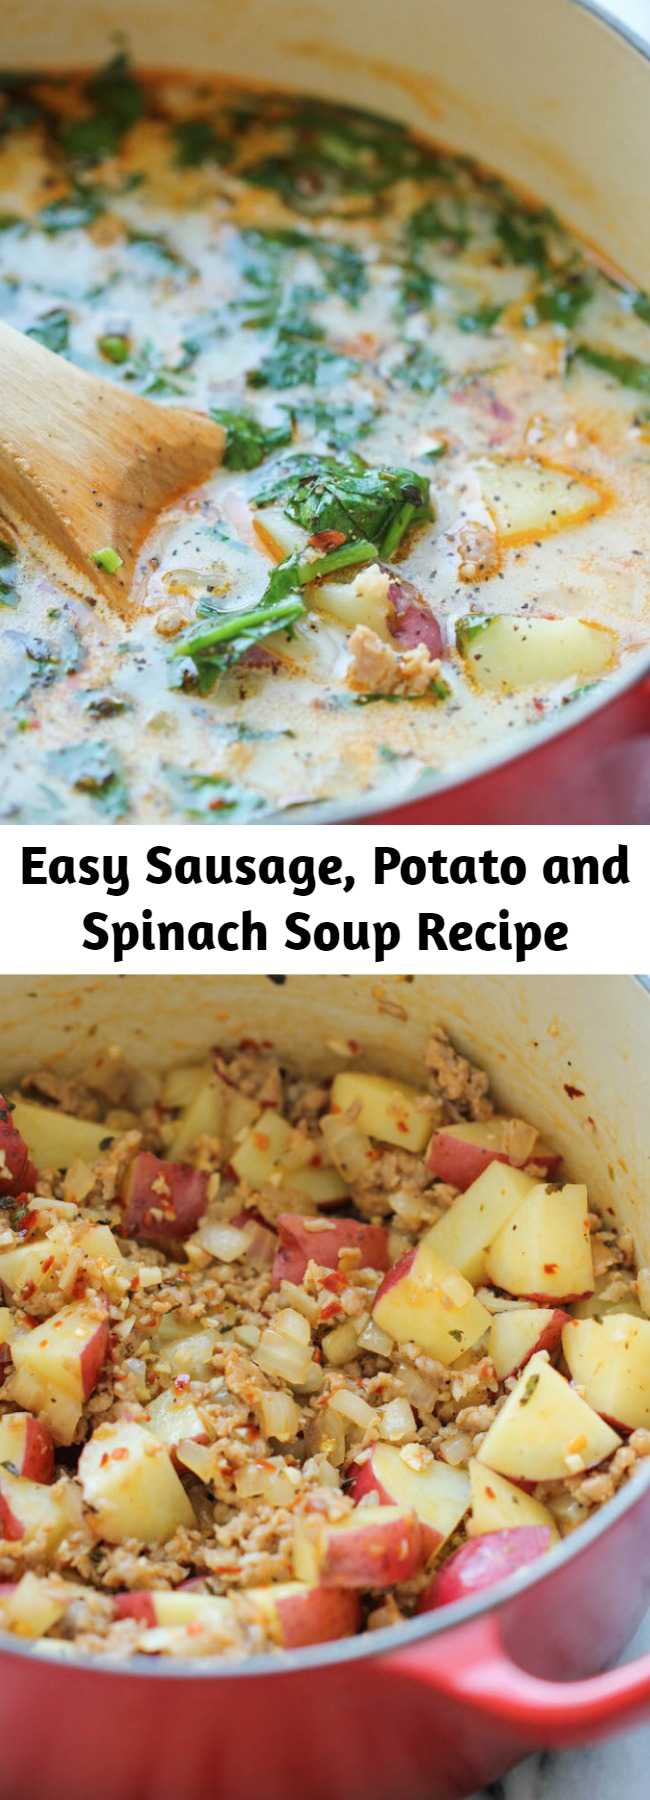 Easy Sausage, Potato and Spinach Soup Recipe - A hearty, comforting soup that’s so easy and simple to make, loaded with tons of fiber and flavor!